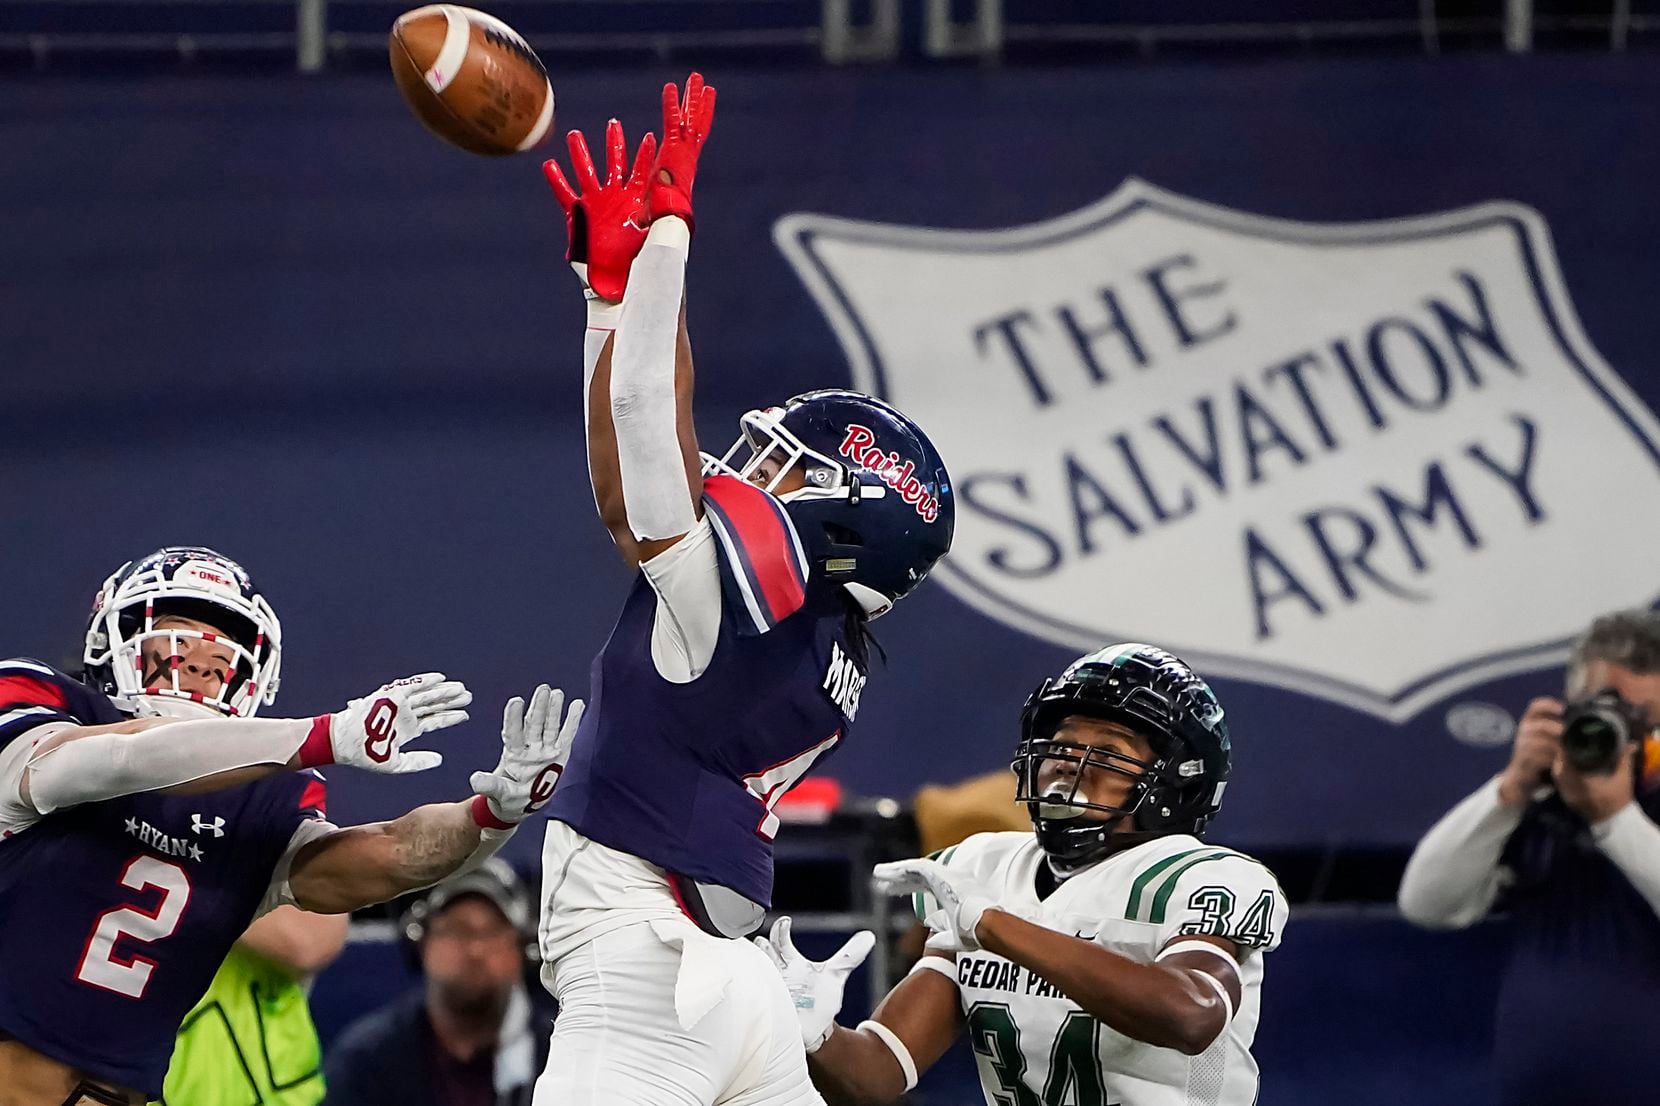 Denton Ryan defensive back Ty Marsh (4) intercepts a pass intended for Cedar Park wide receiver Josh Cameron (34) during the first half of the Class 5A Division I state football championship game at AT&T Stadium on Friday, Jan. 15, 2021, in Arlington, Texas. (Smiley N. Pool/The Dallas Morning News)